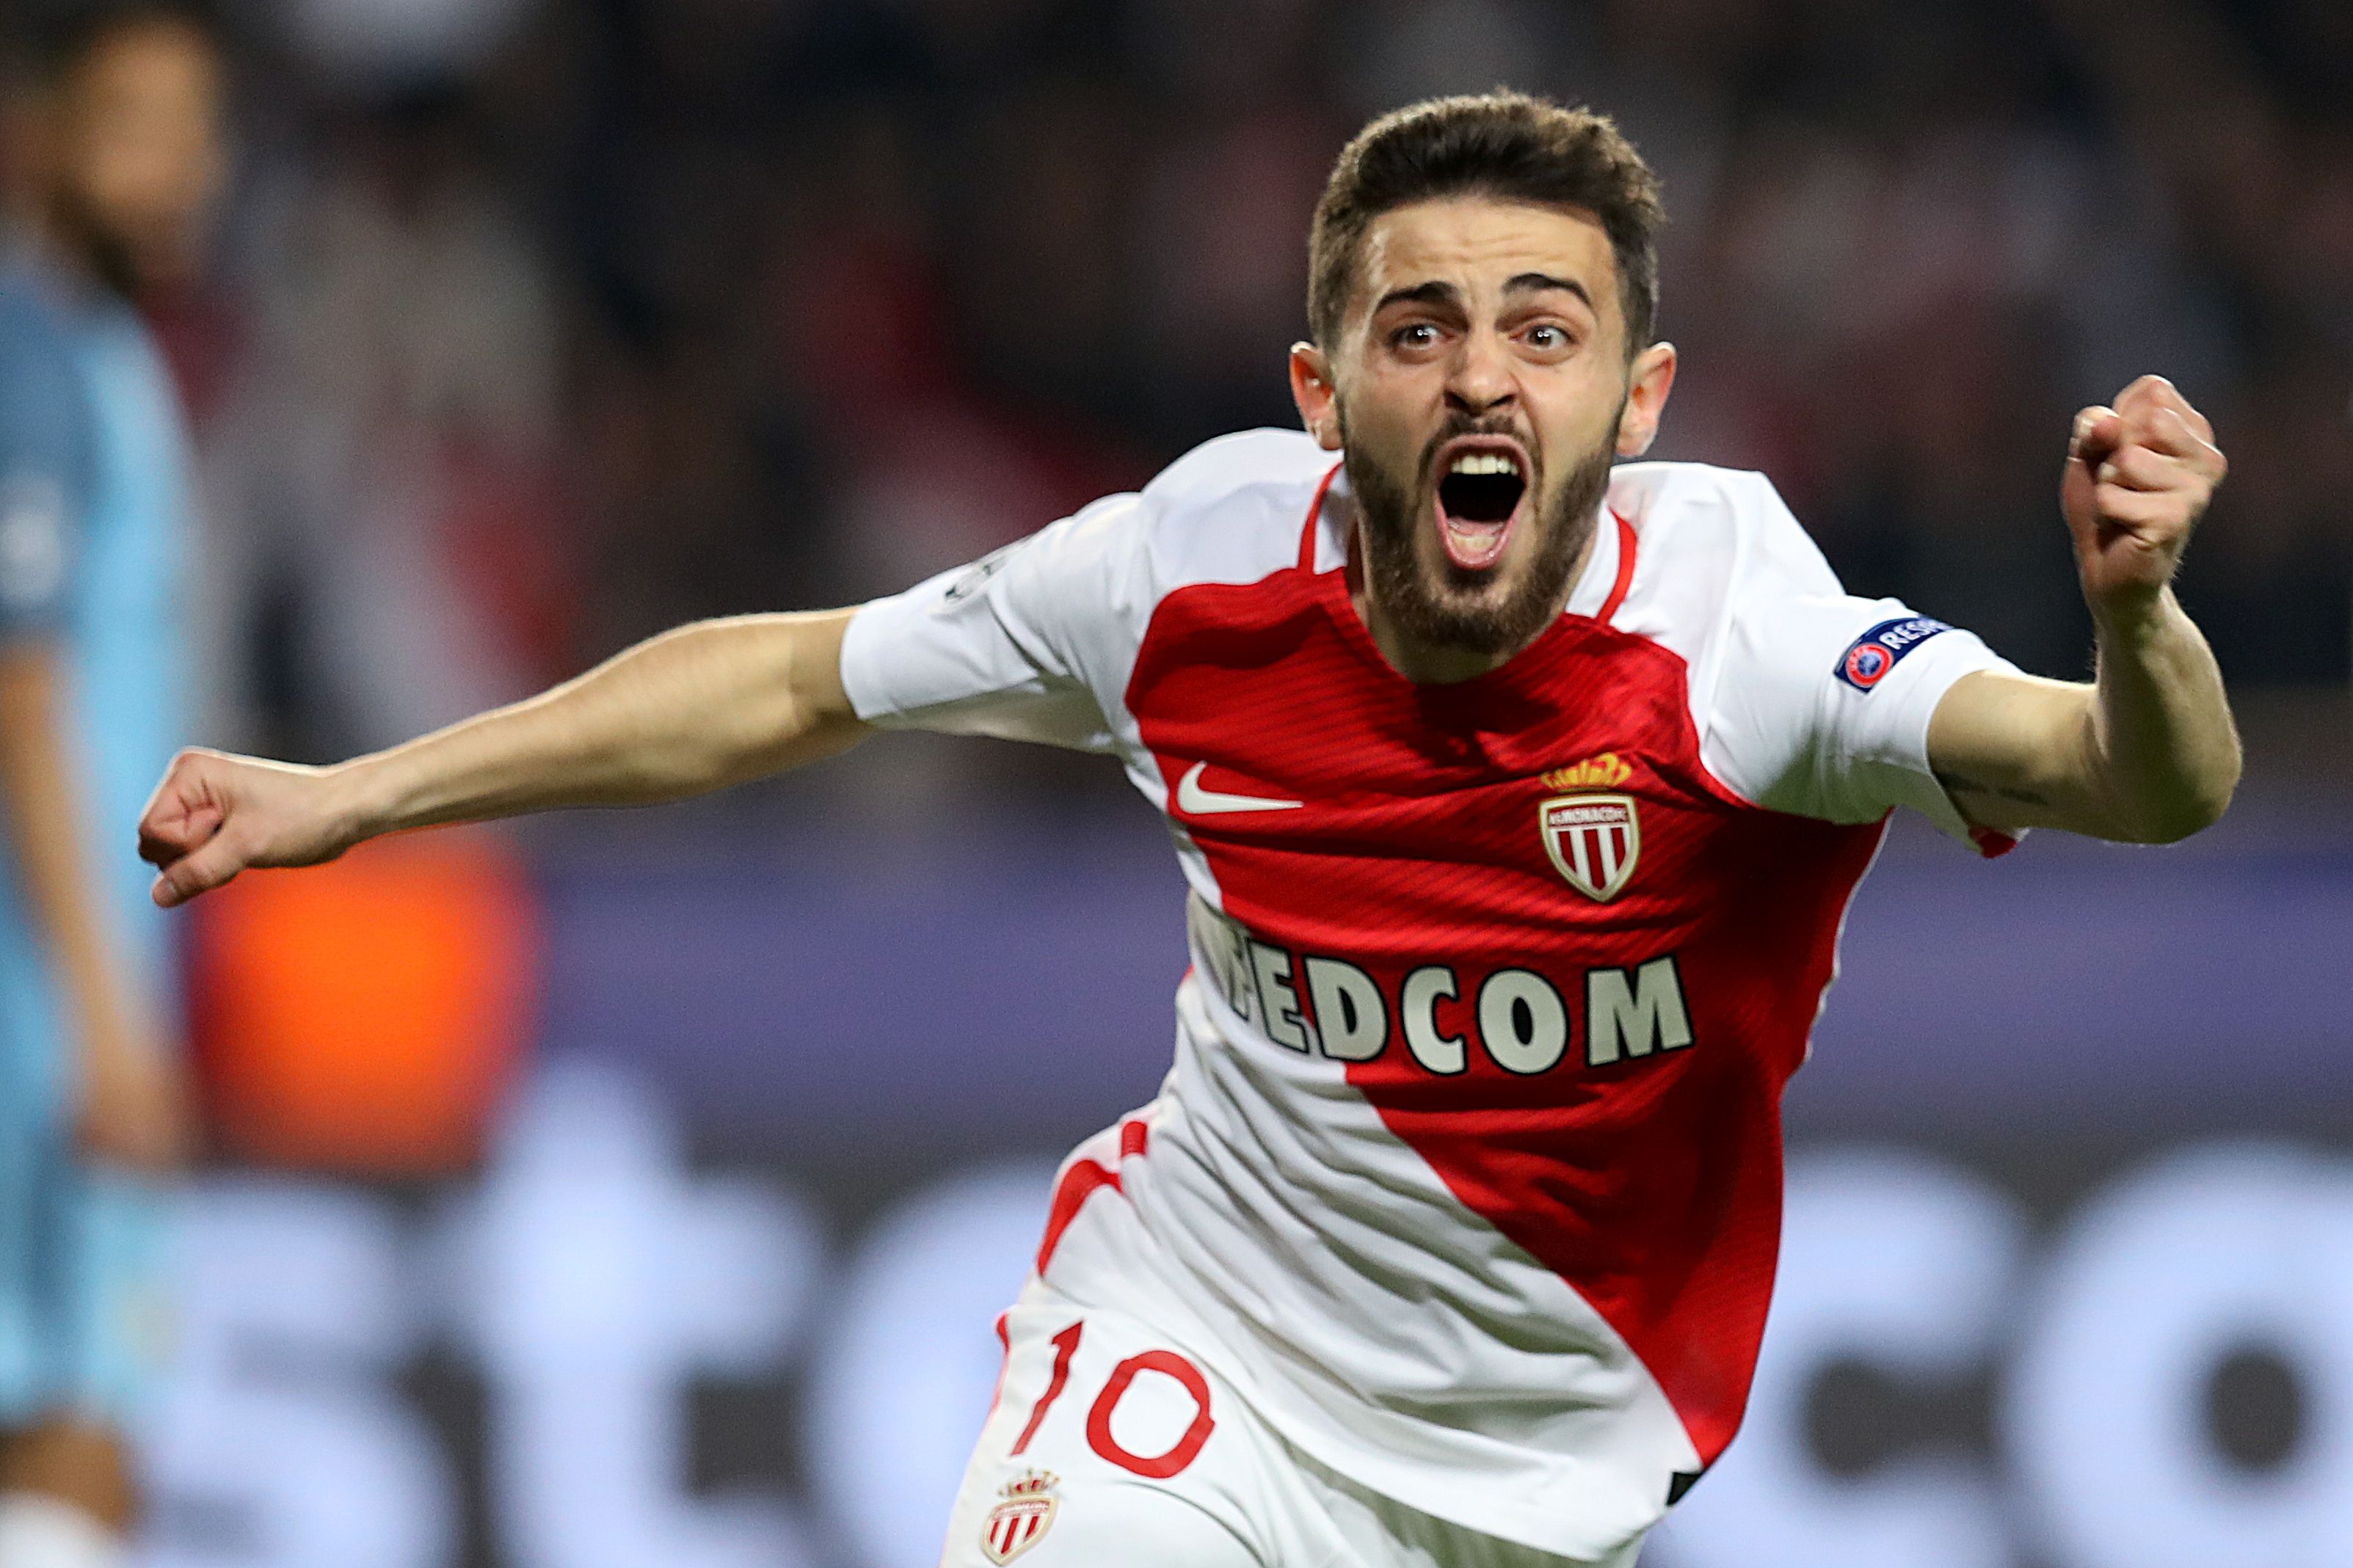 Bernardo Silva: “I’m fine here but every player aspires to play in one of the top leagues”